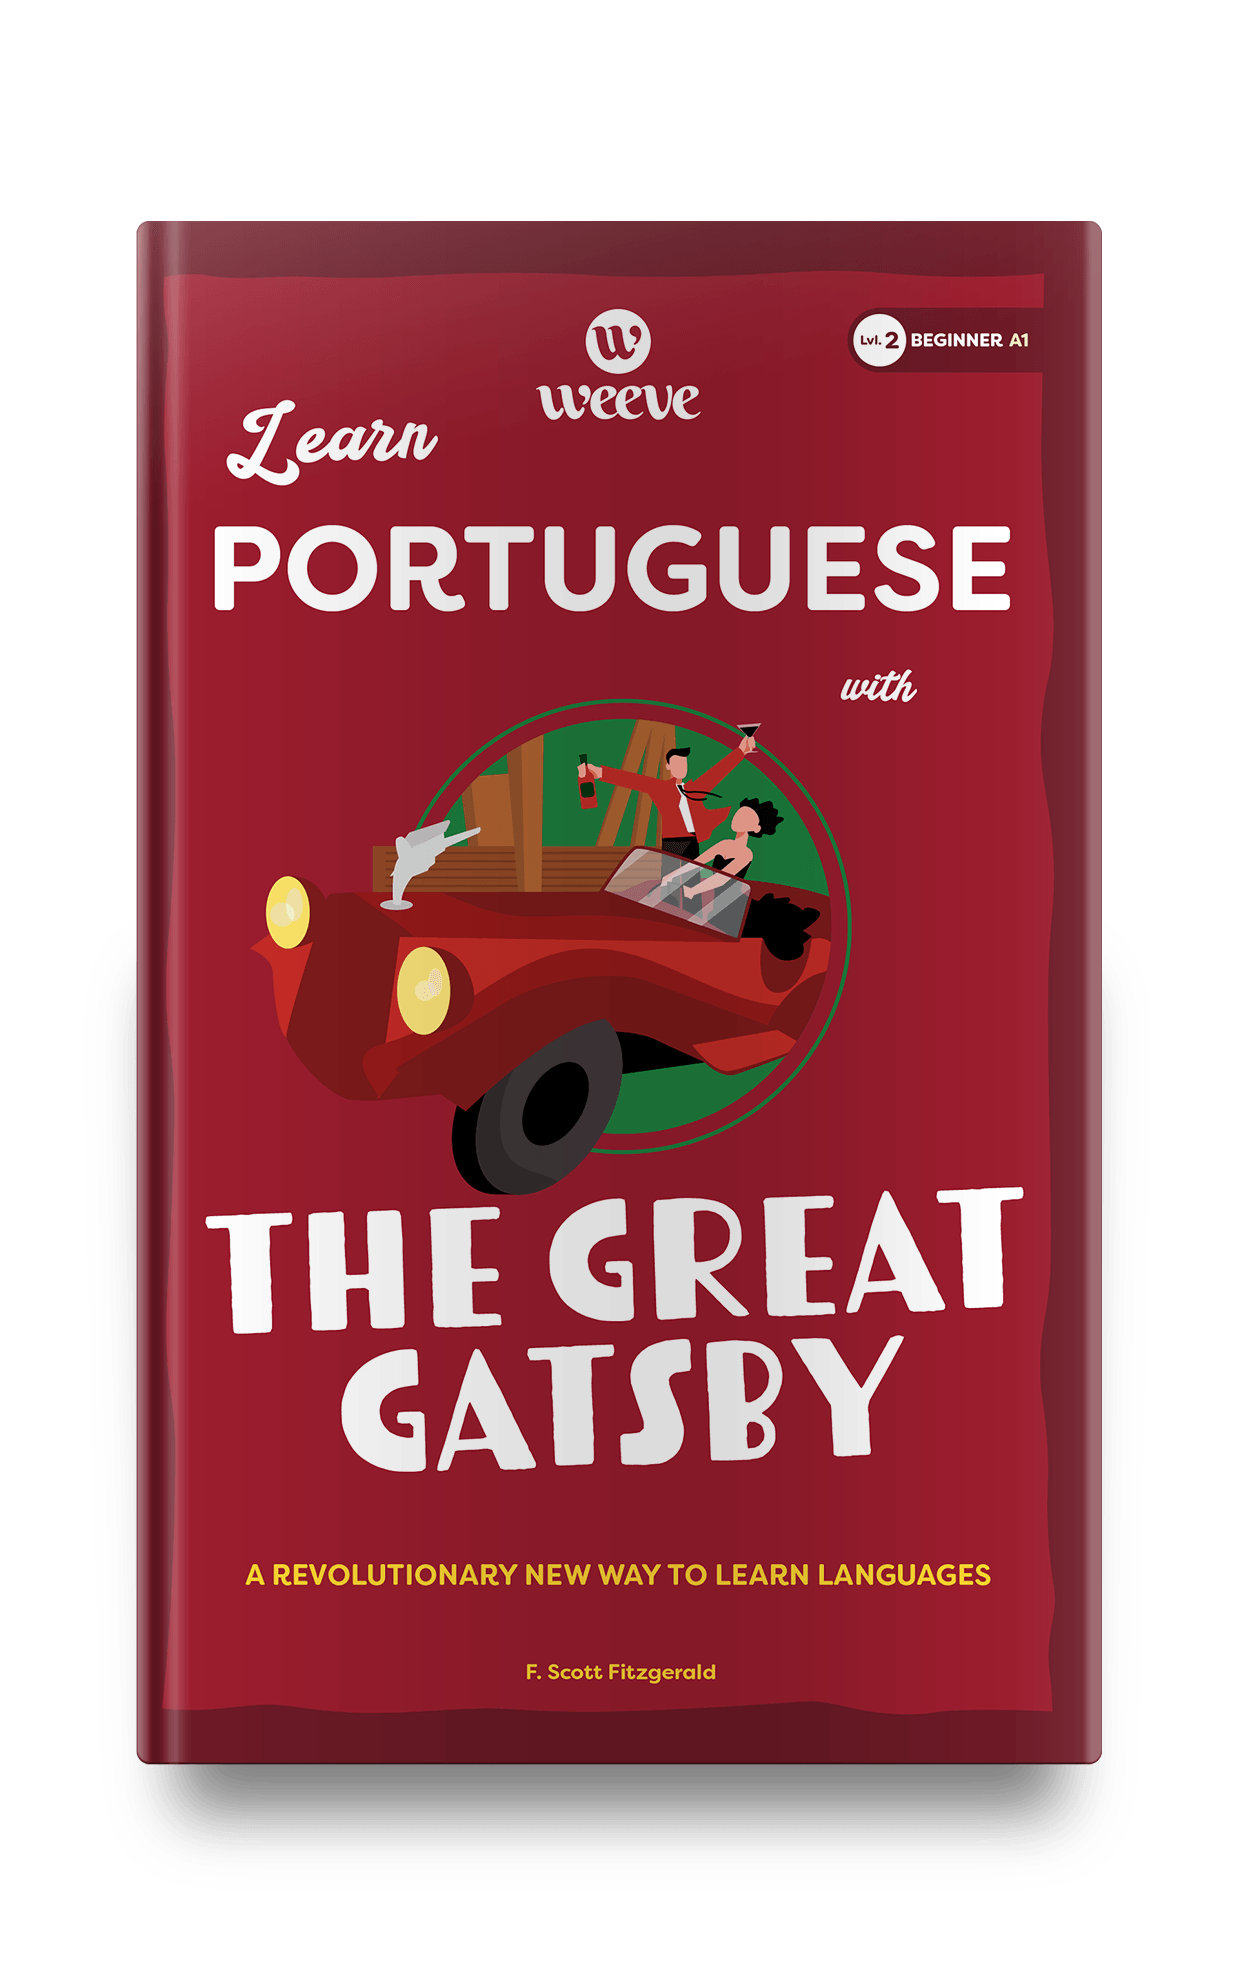 Learn Portuguese with The Great Gatsby - Weeve